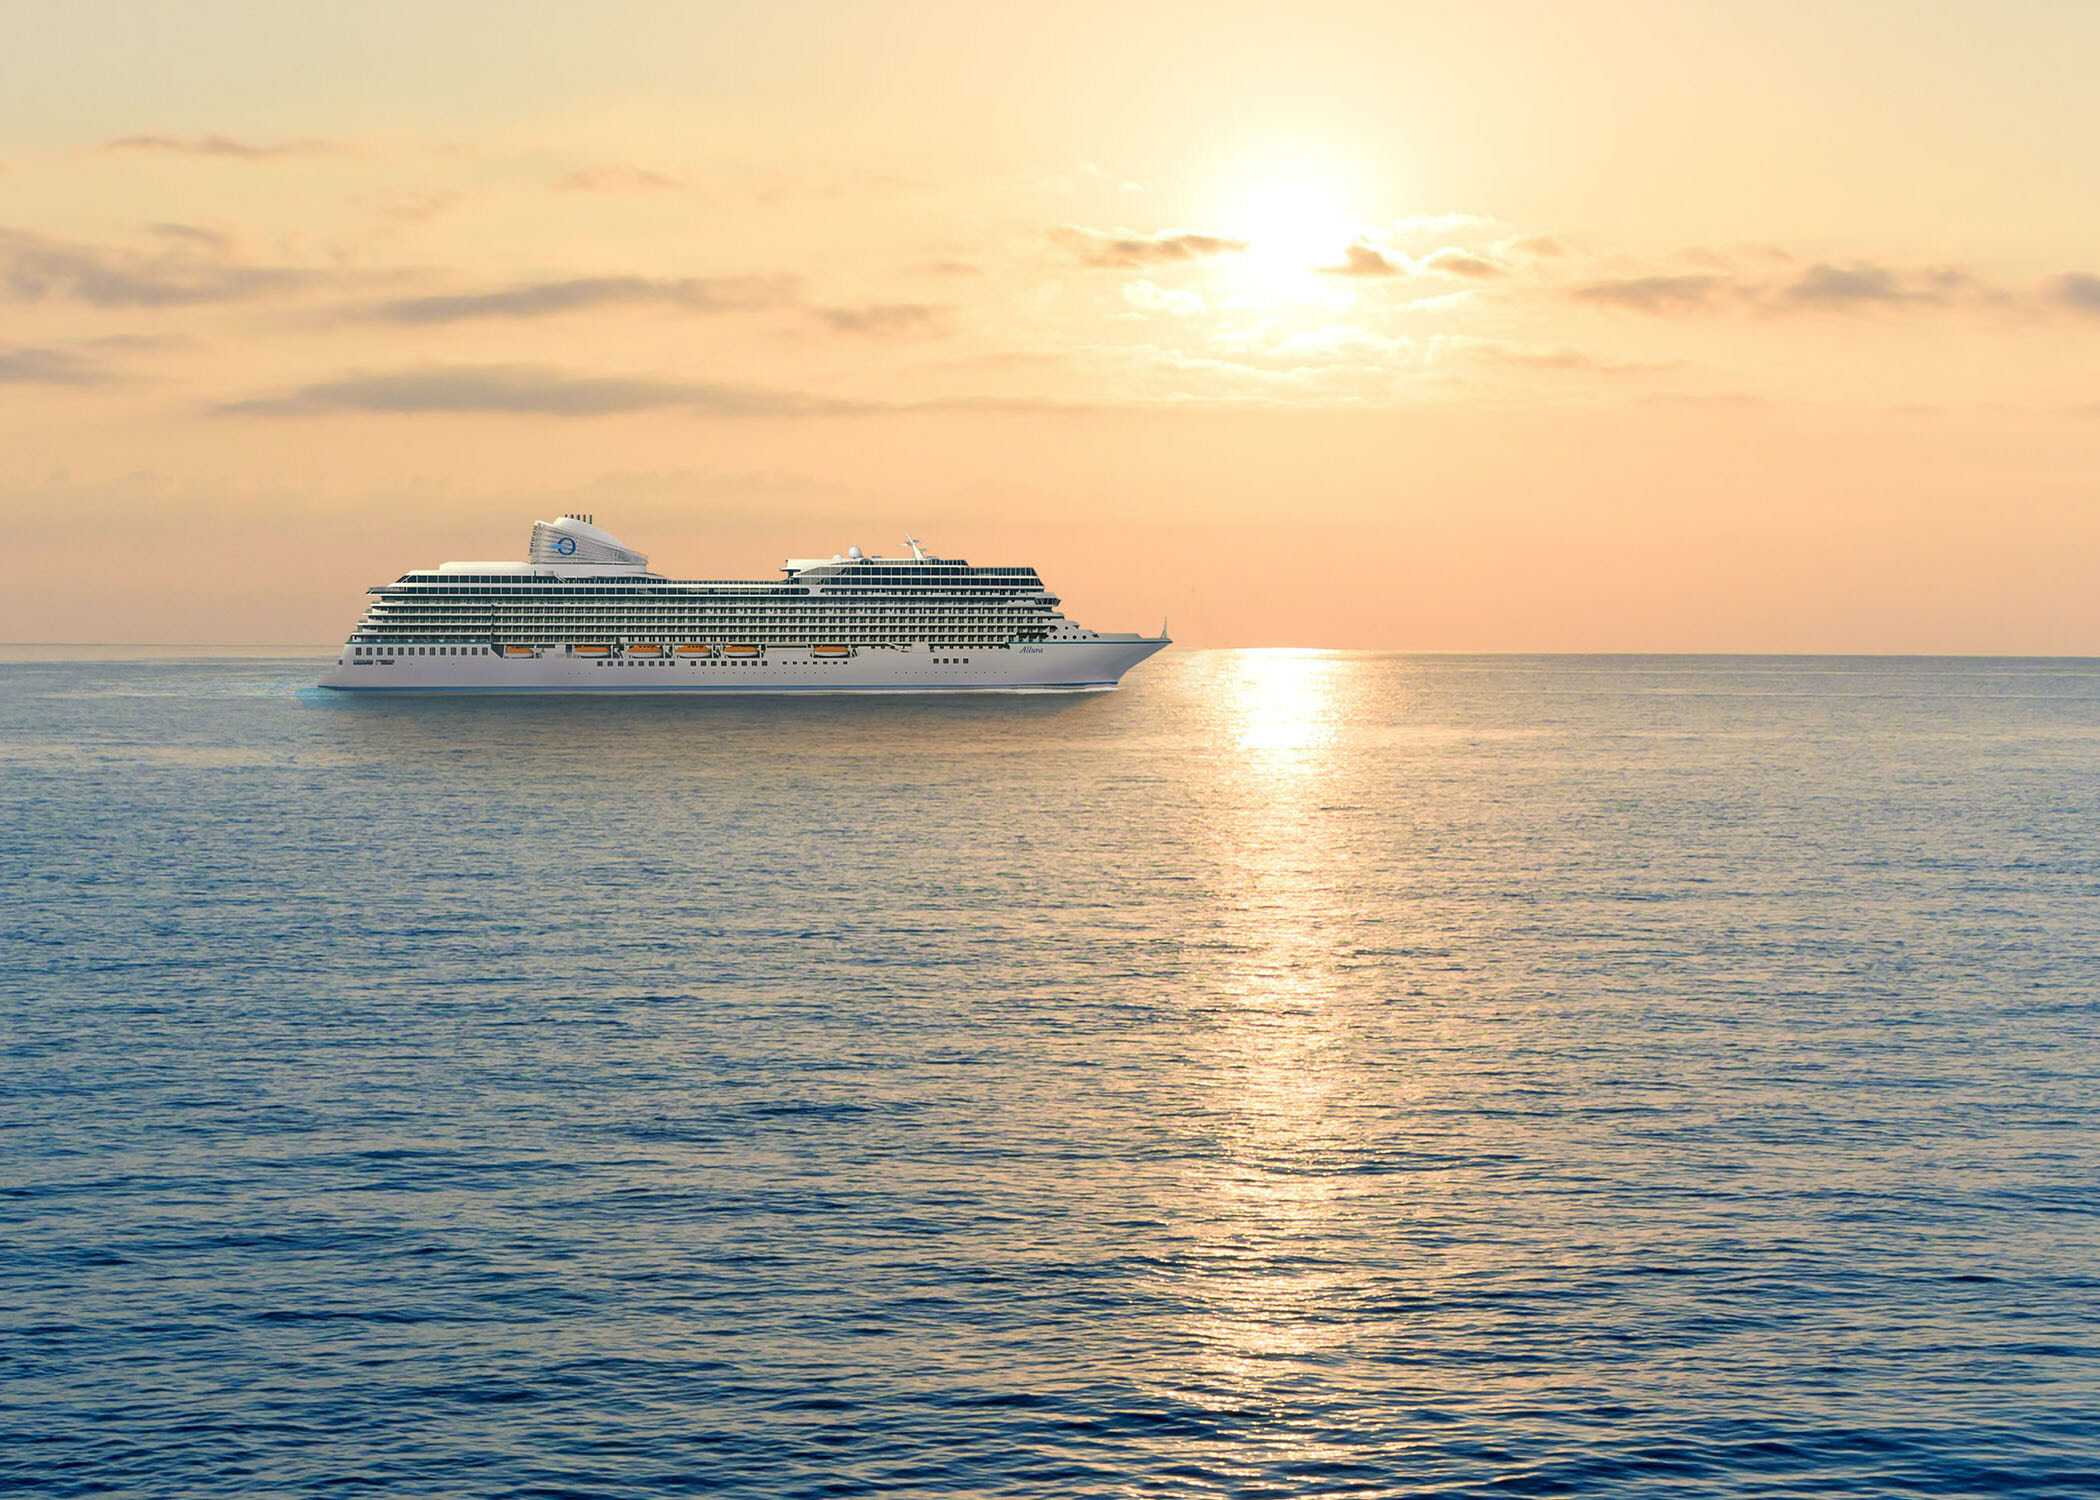 Oceania Cruises Welcomes Allura To Its Acclaimed Fleet. Setting Sail in 2025, Vista's Sister Ship is the Line's Second Allura Class Ship (Image at LateCruiseNews.com - January 2023)